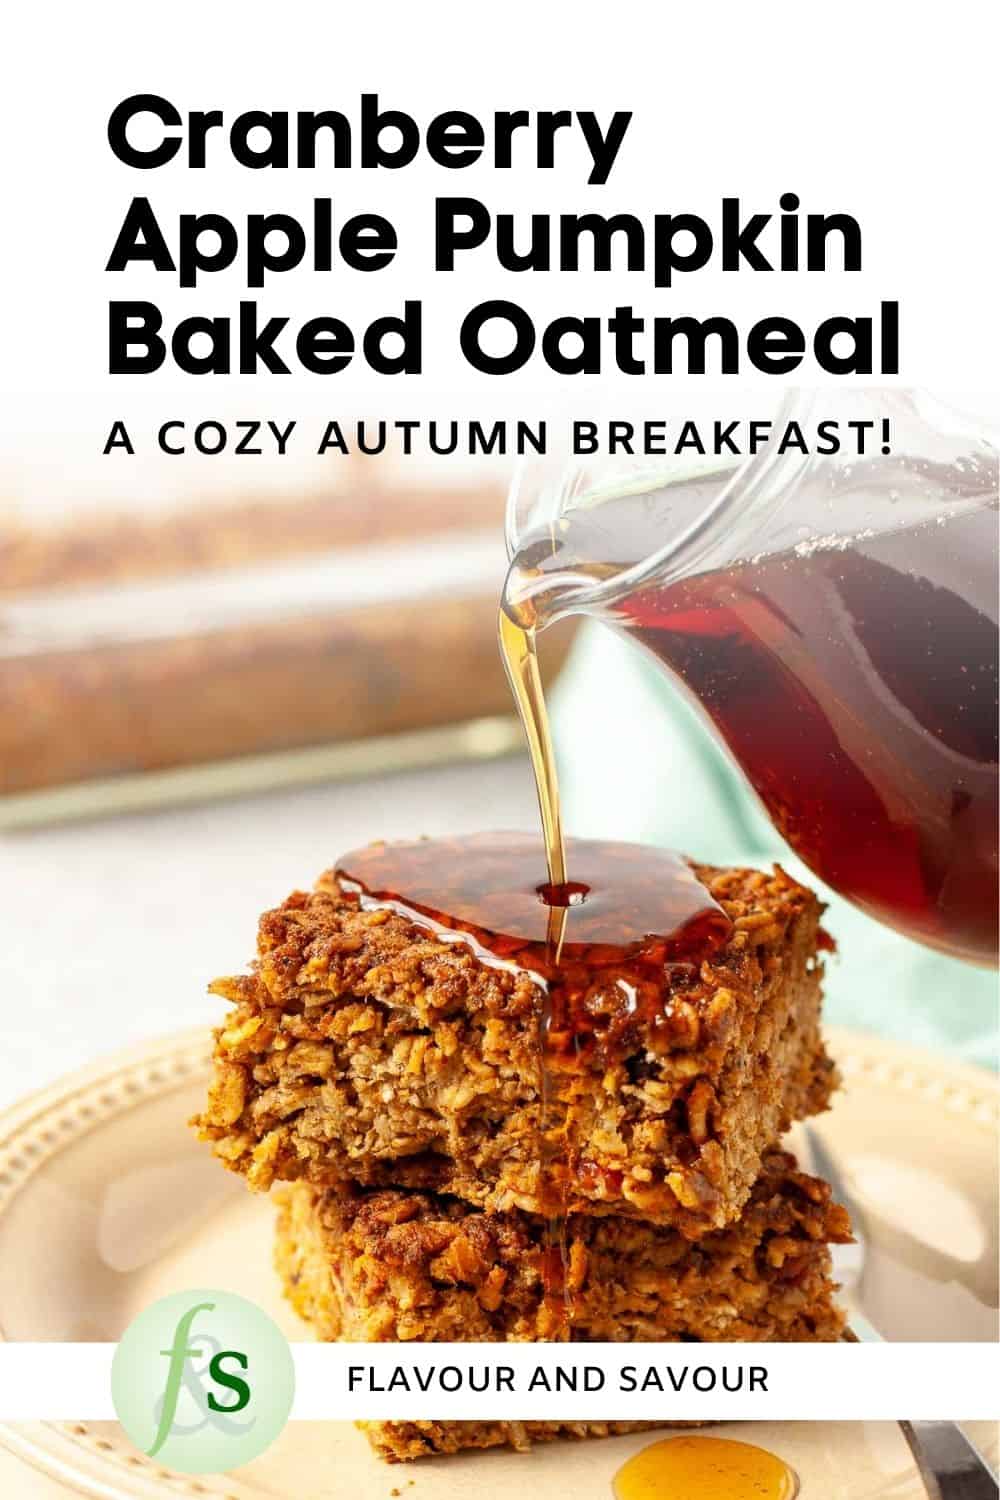 Image with text overlay for cranberry apple pumpkin baked oatmeal.